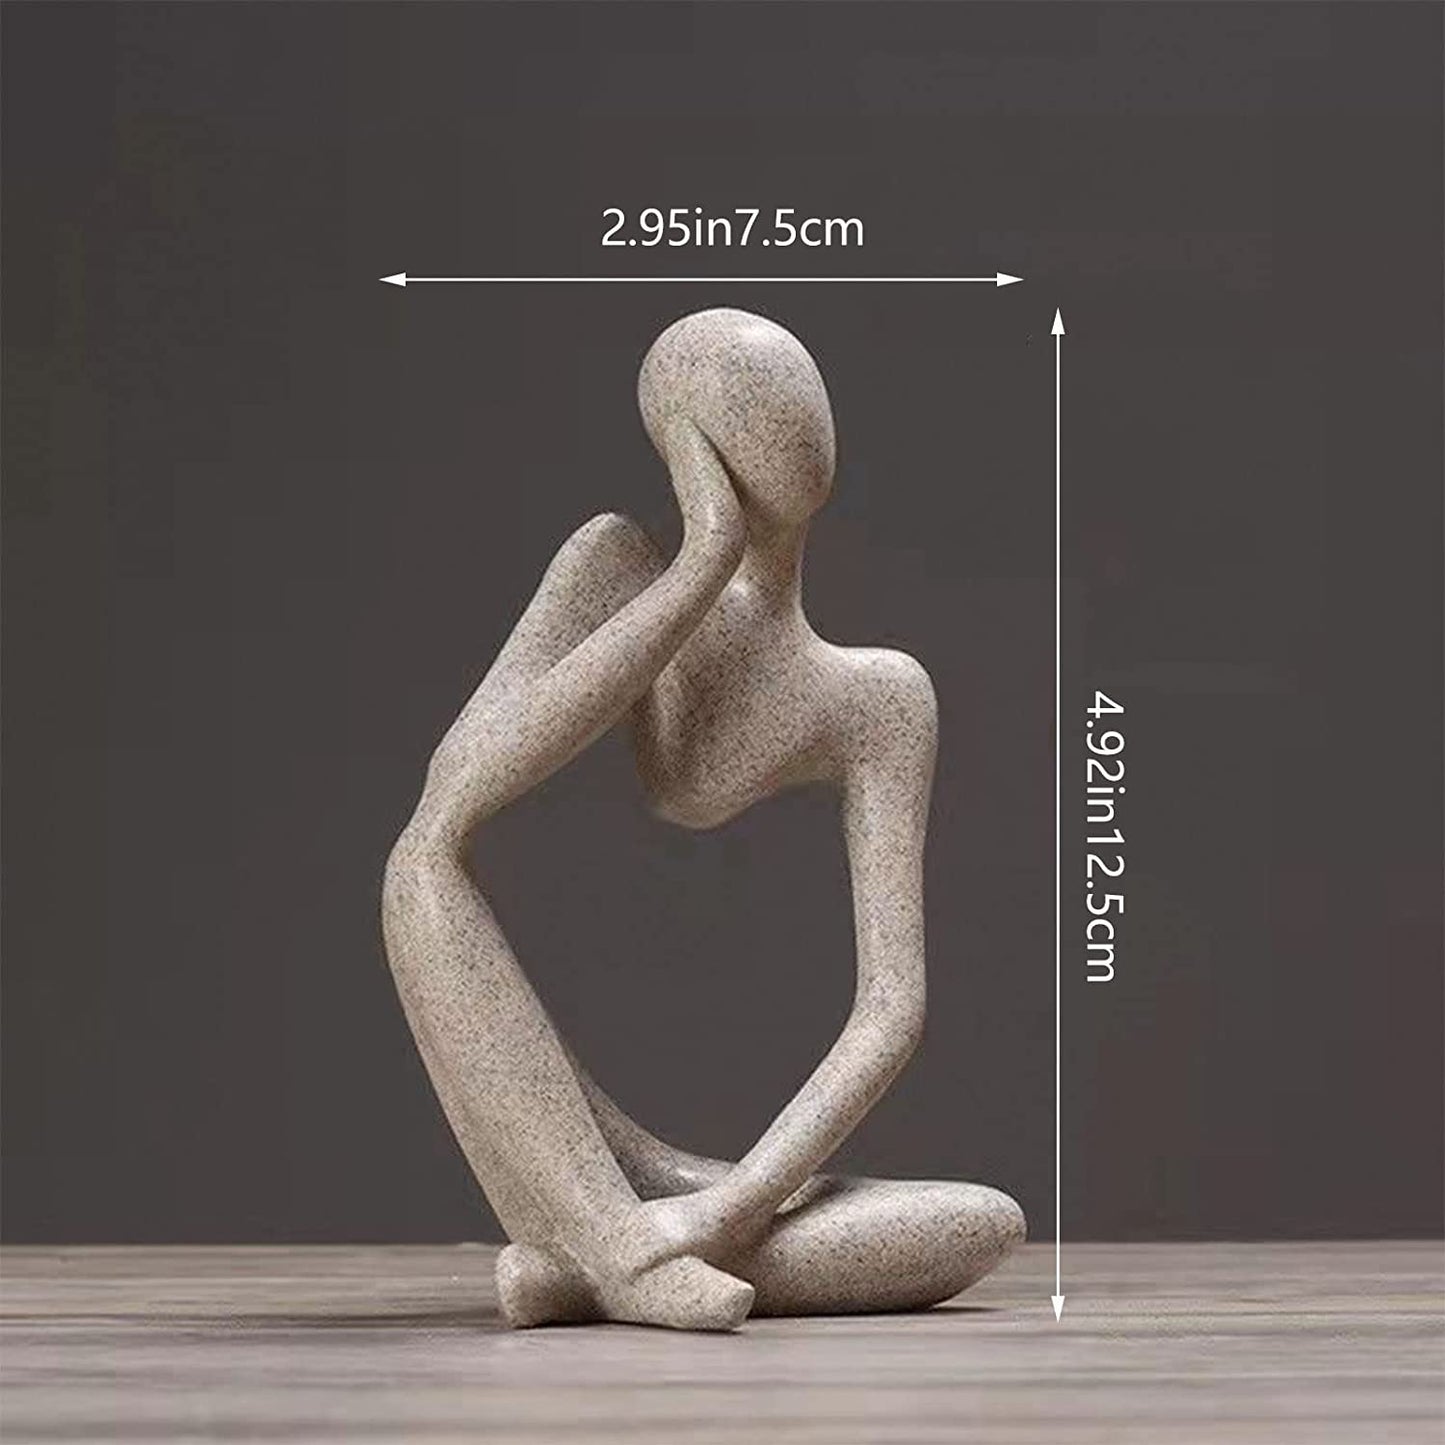 Thinker Statues and Sculptures, Sandstone Resin Thinker Statue Ornaments, Abstract Style Sculptures, Housewarming Gifts, Housewarming Decorations, Living Room Dining Desk Decorations (Right, Small)